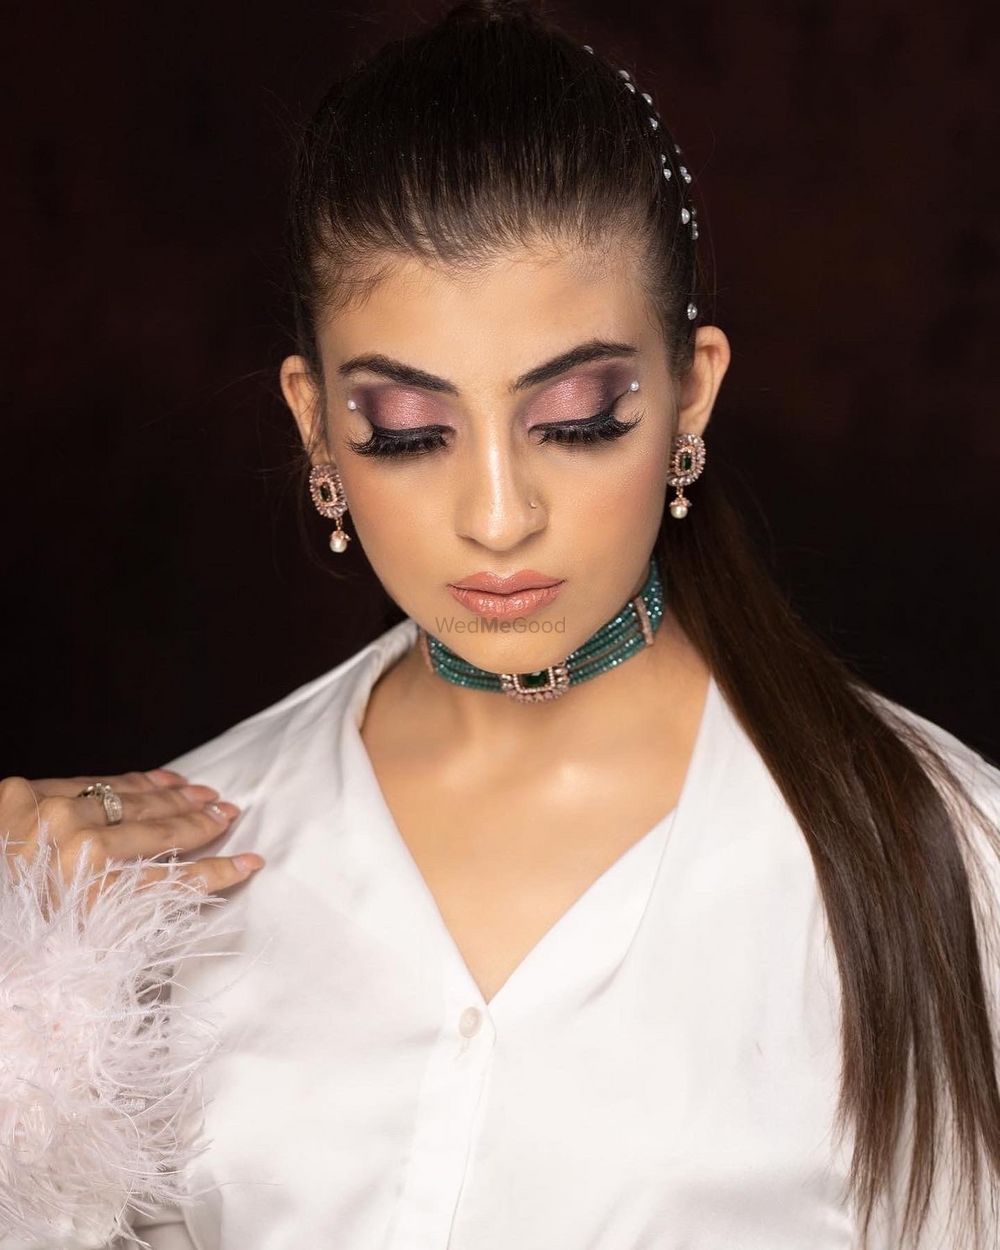 Photo From suhaana X "Ethereal Elegance" - By Alka Kohli Makeovers